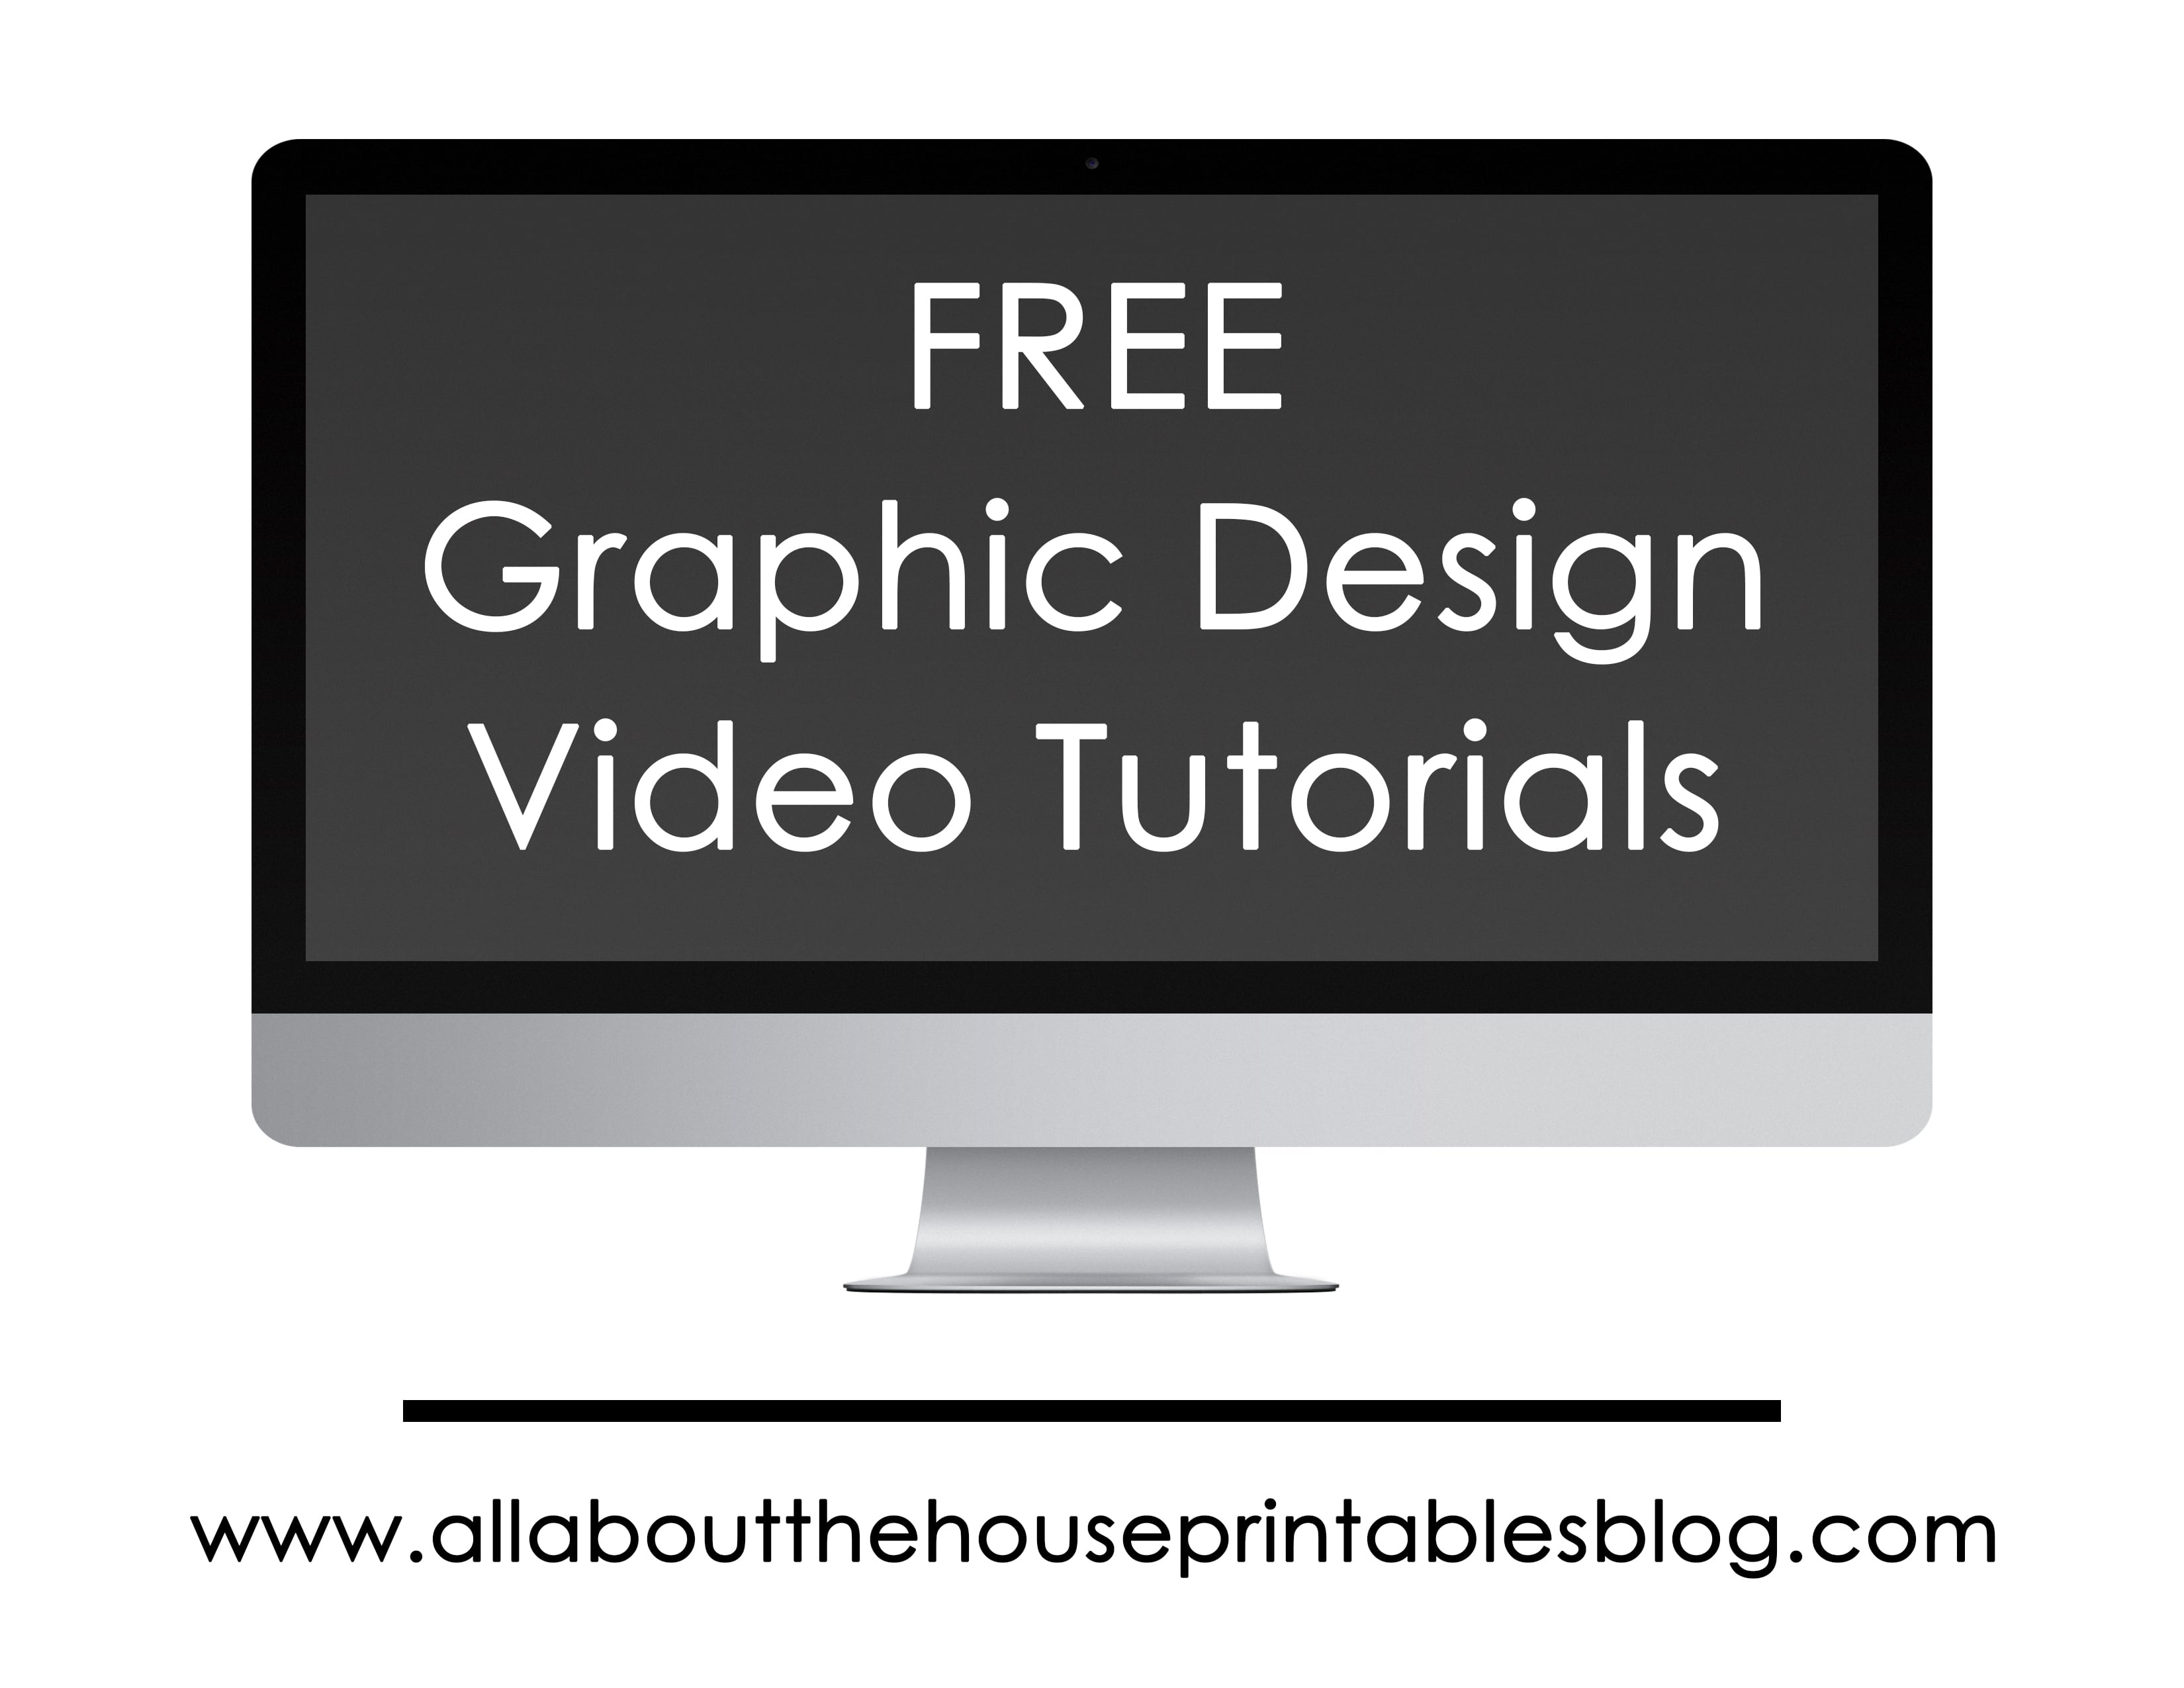 free-graphic-design-video-tutorials-pattern-design-how-to-make-printables-ecourse-step-by-step-party-printables-textile-fabric-graphic-designer-min